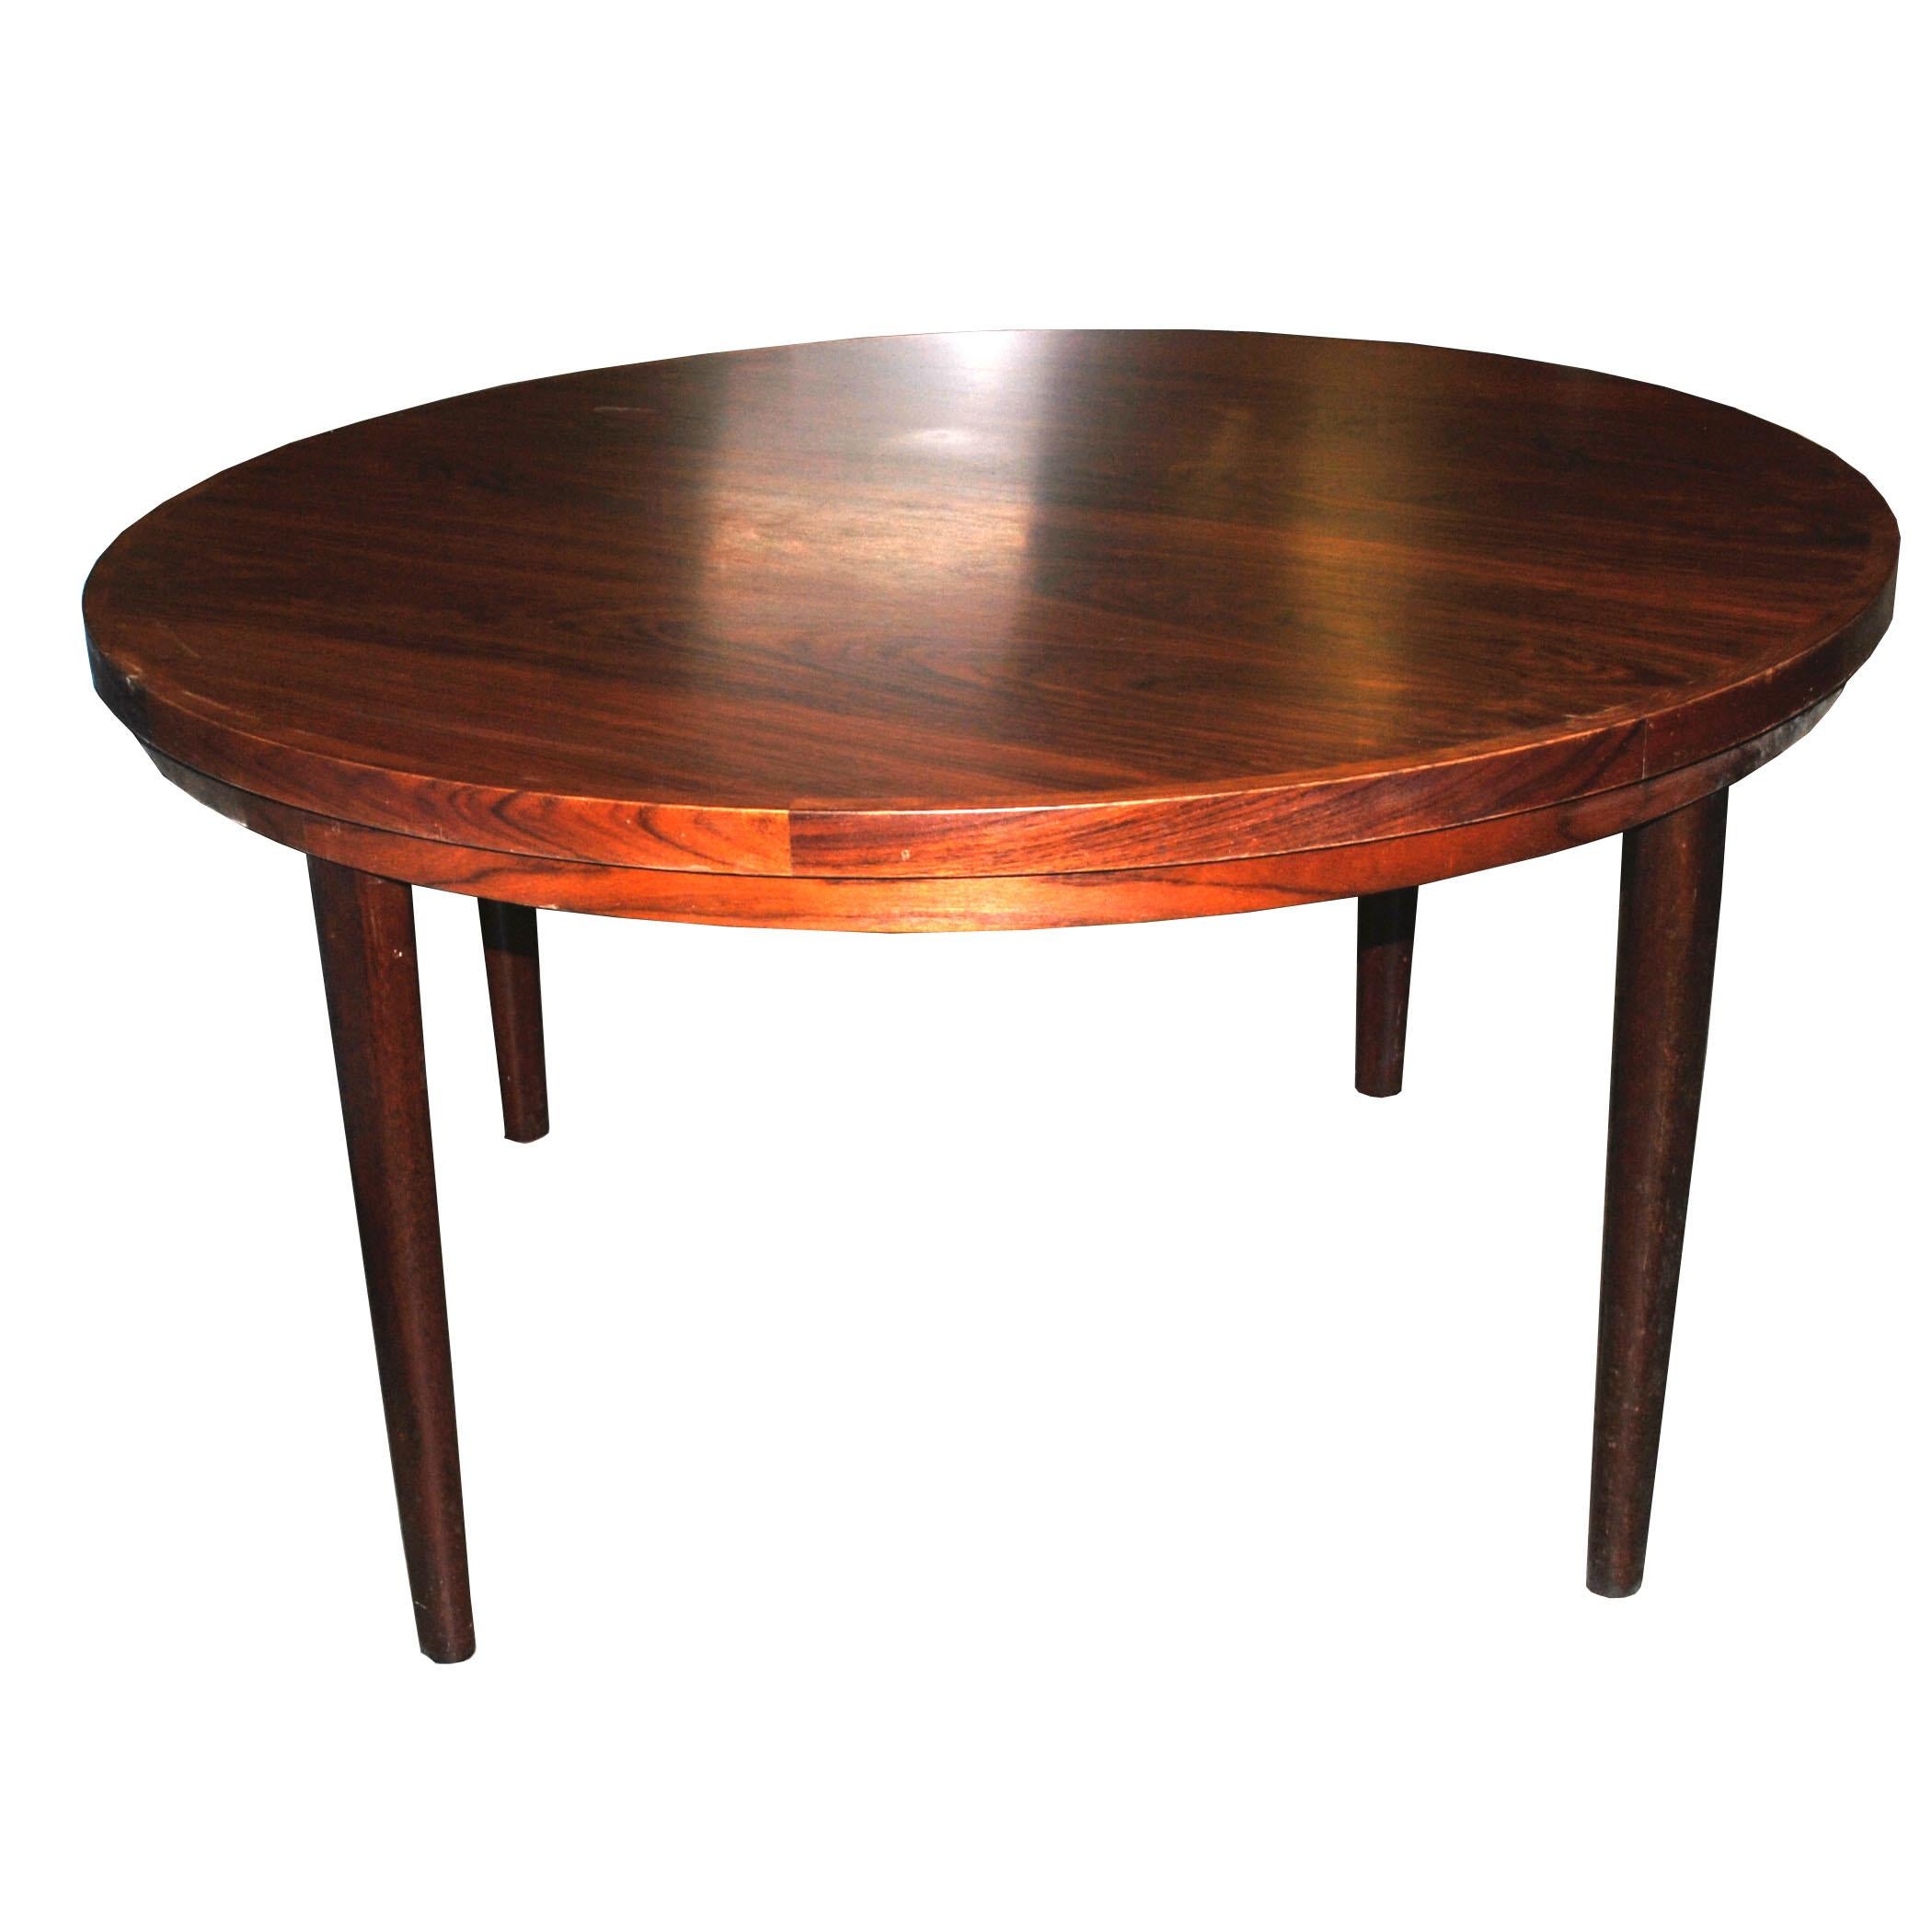 A vintage Danish dining table made of beautiful rosewood. This table has a unique rotating tabletop.   Stamped made in Denmark.